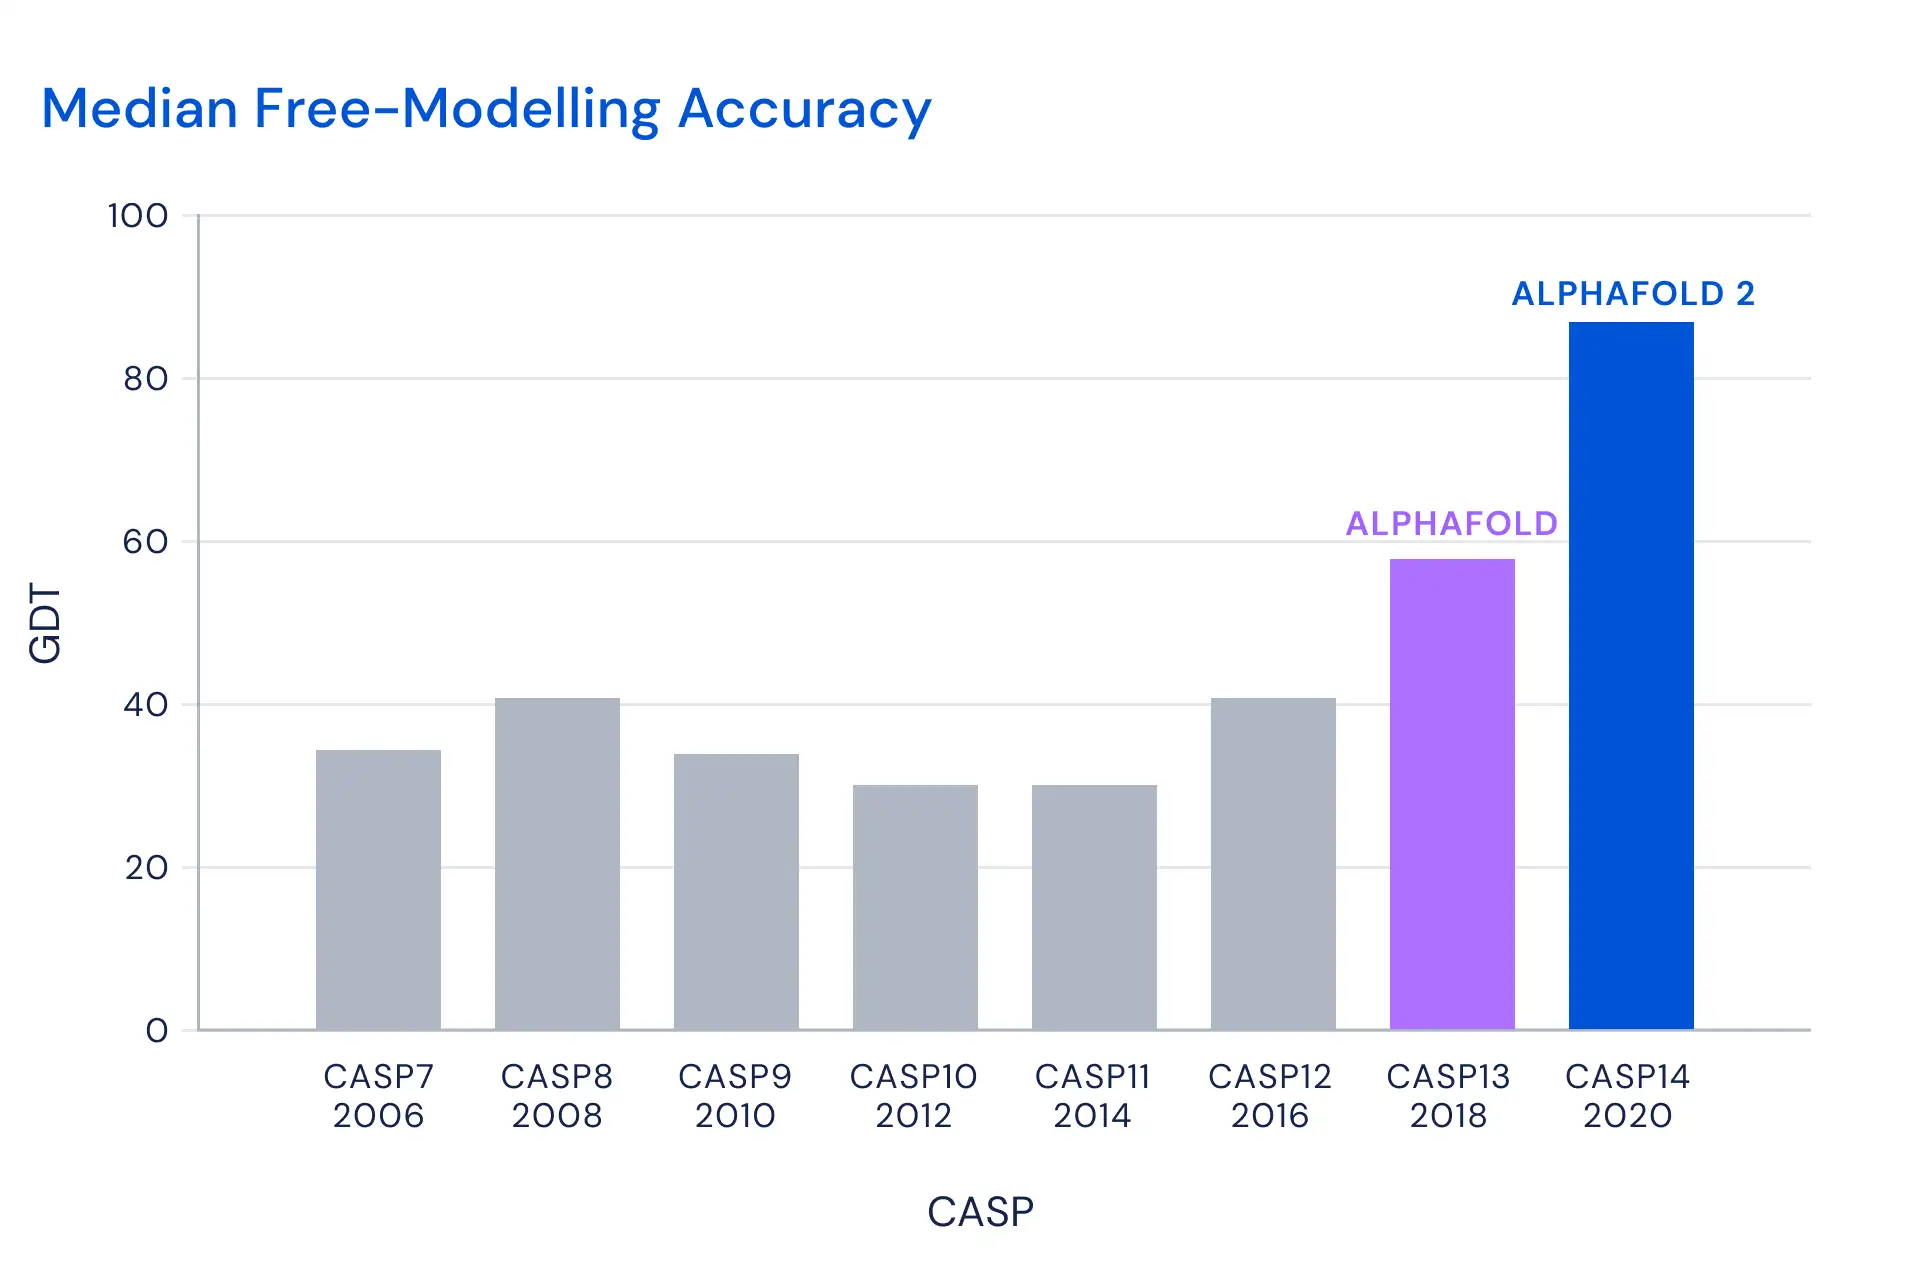 Median accuracy of predictions in the free modelling category for the best team each year